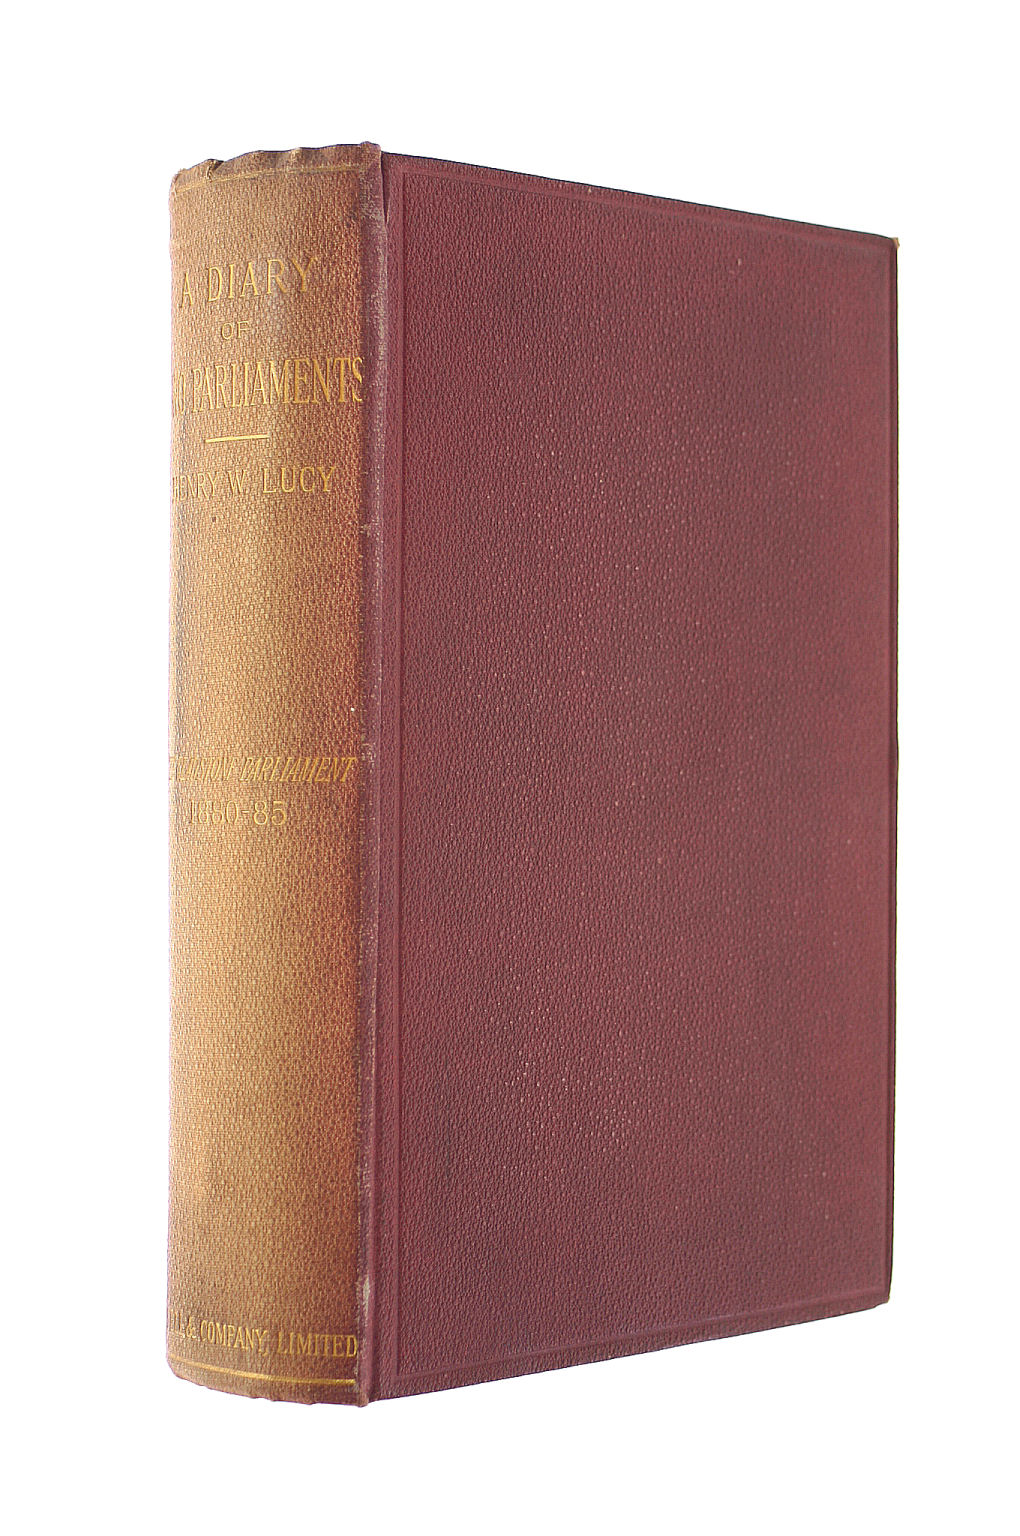 HENRY W LUCY - A Diary of Two Parliaments: the Gladstone Parliament 1880-1883